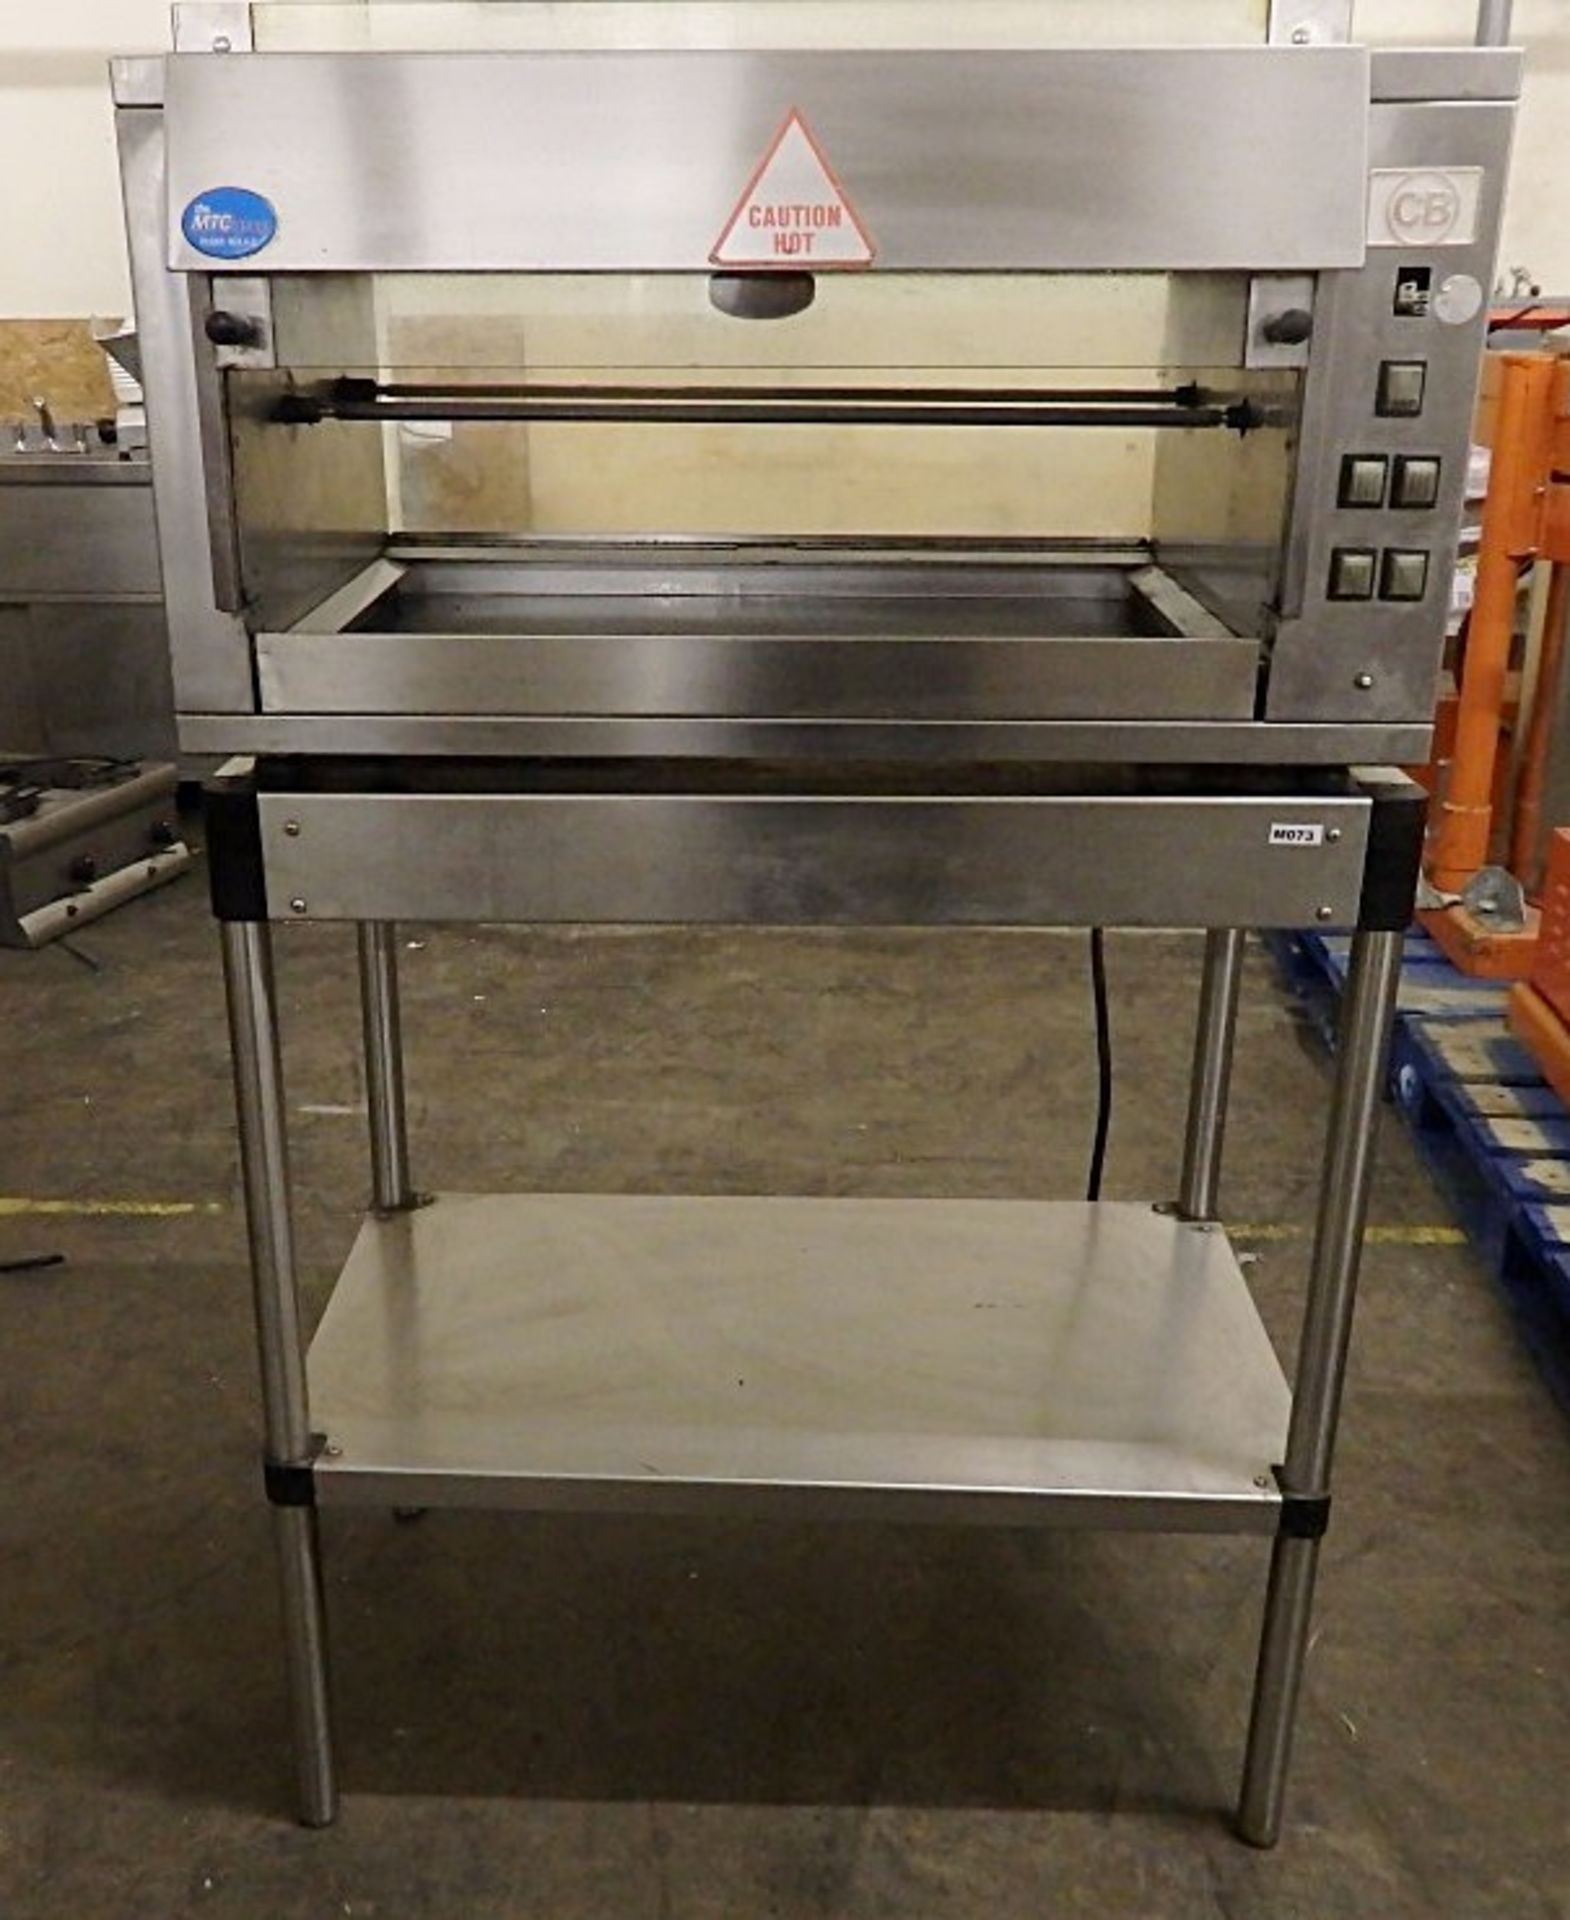 1 x Rotisserie Oven And Stand Reserve - Dimensions; Oven W90 x D56 x H47 (H137 Inc. Stand) Ref: M073 - Image 2 of 6